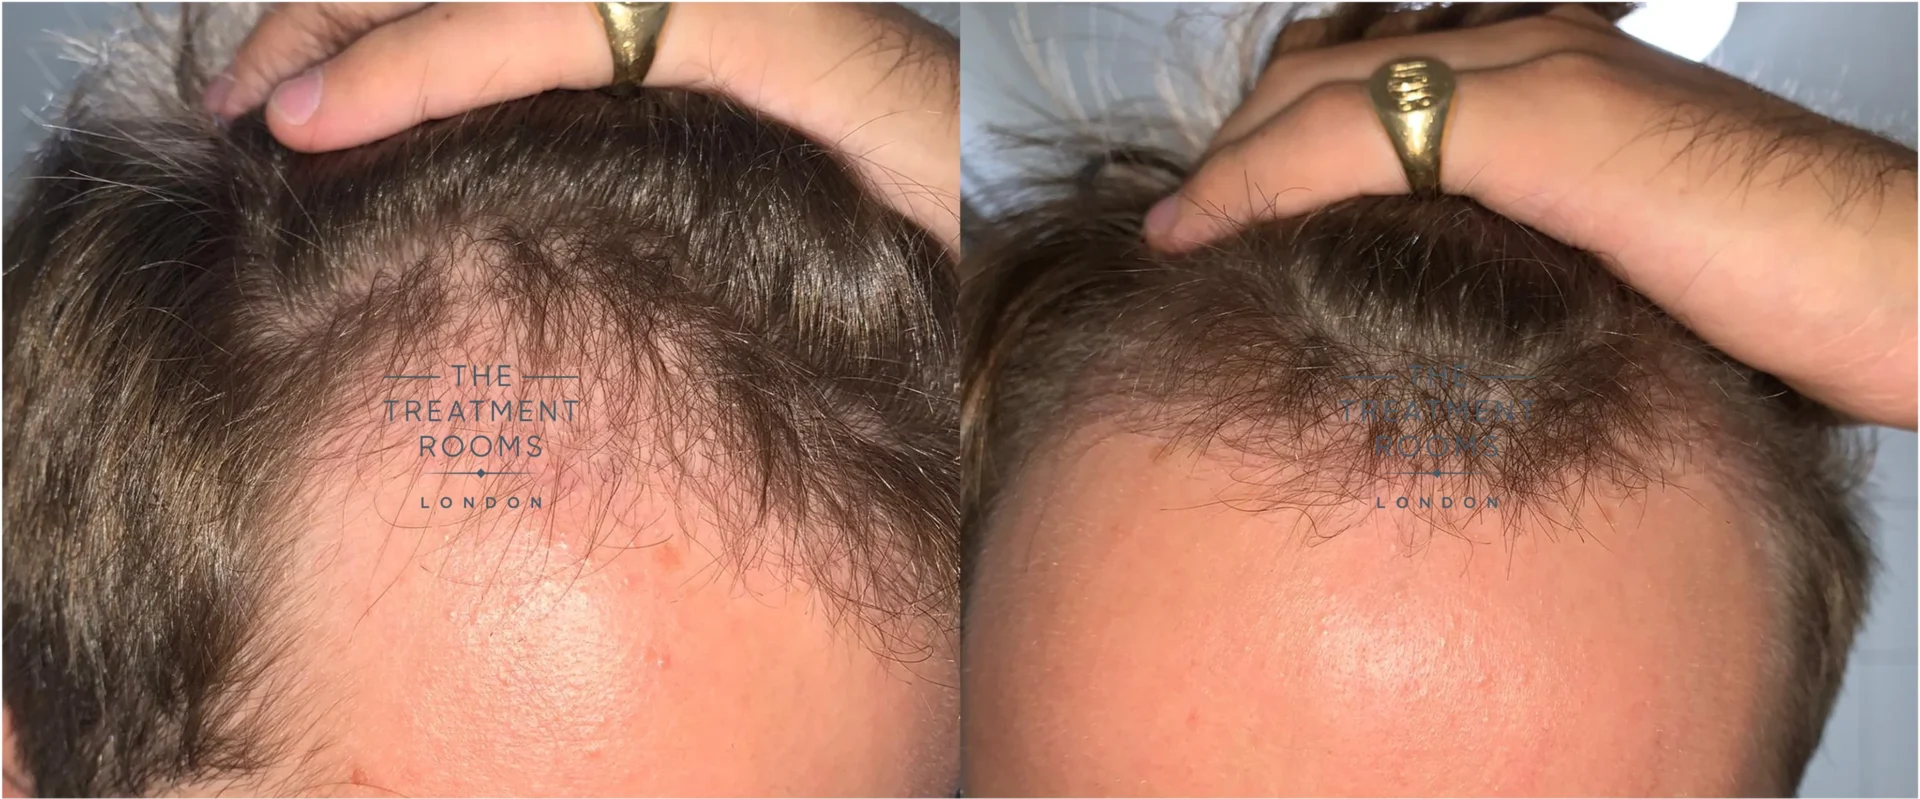 Unshaven hair transplant month 3 after surgery